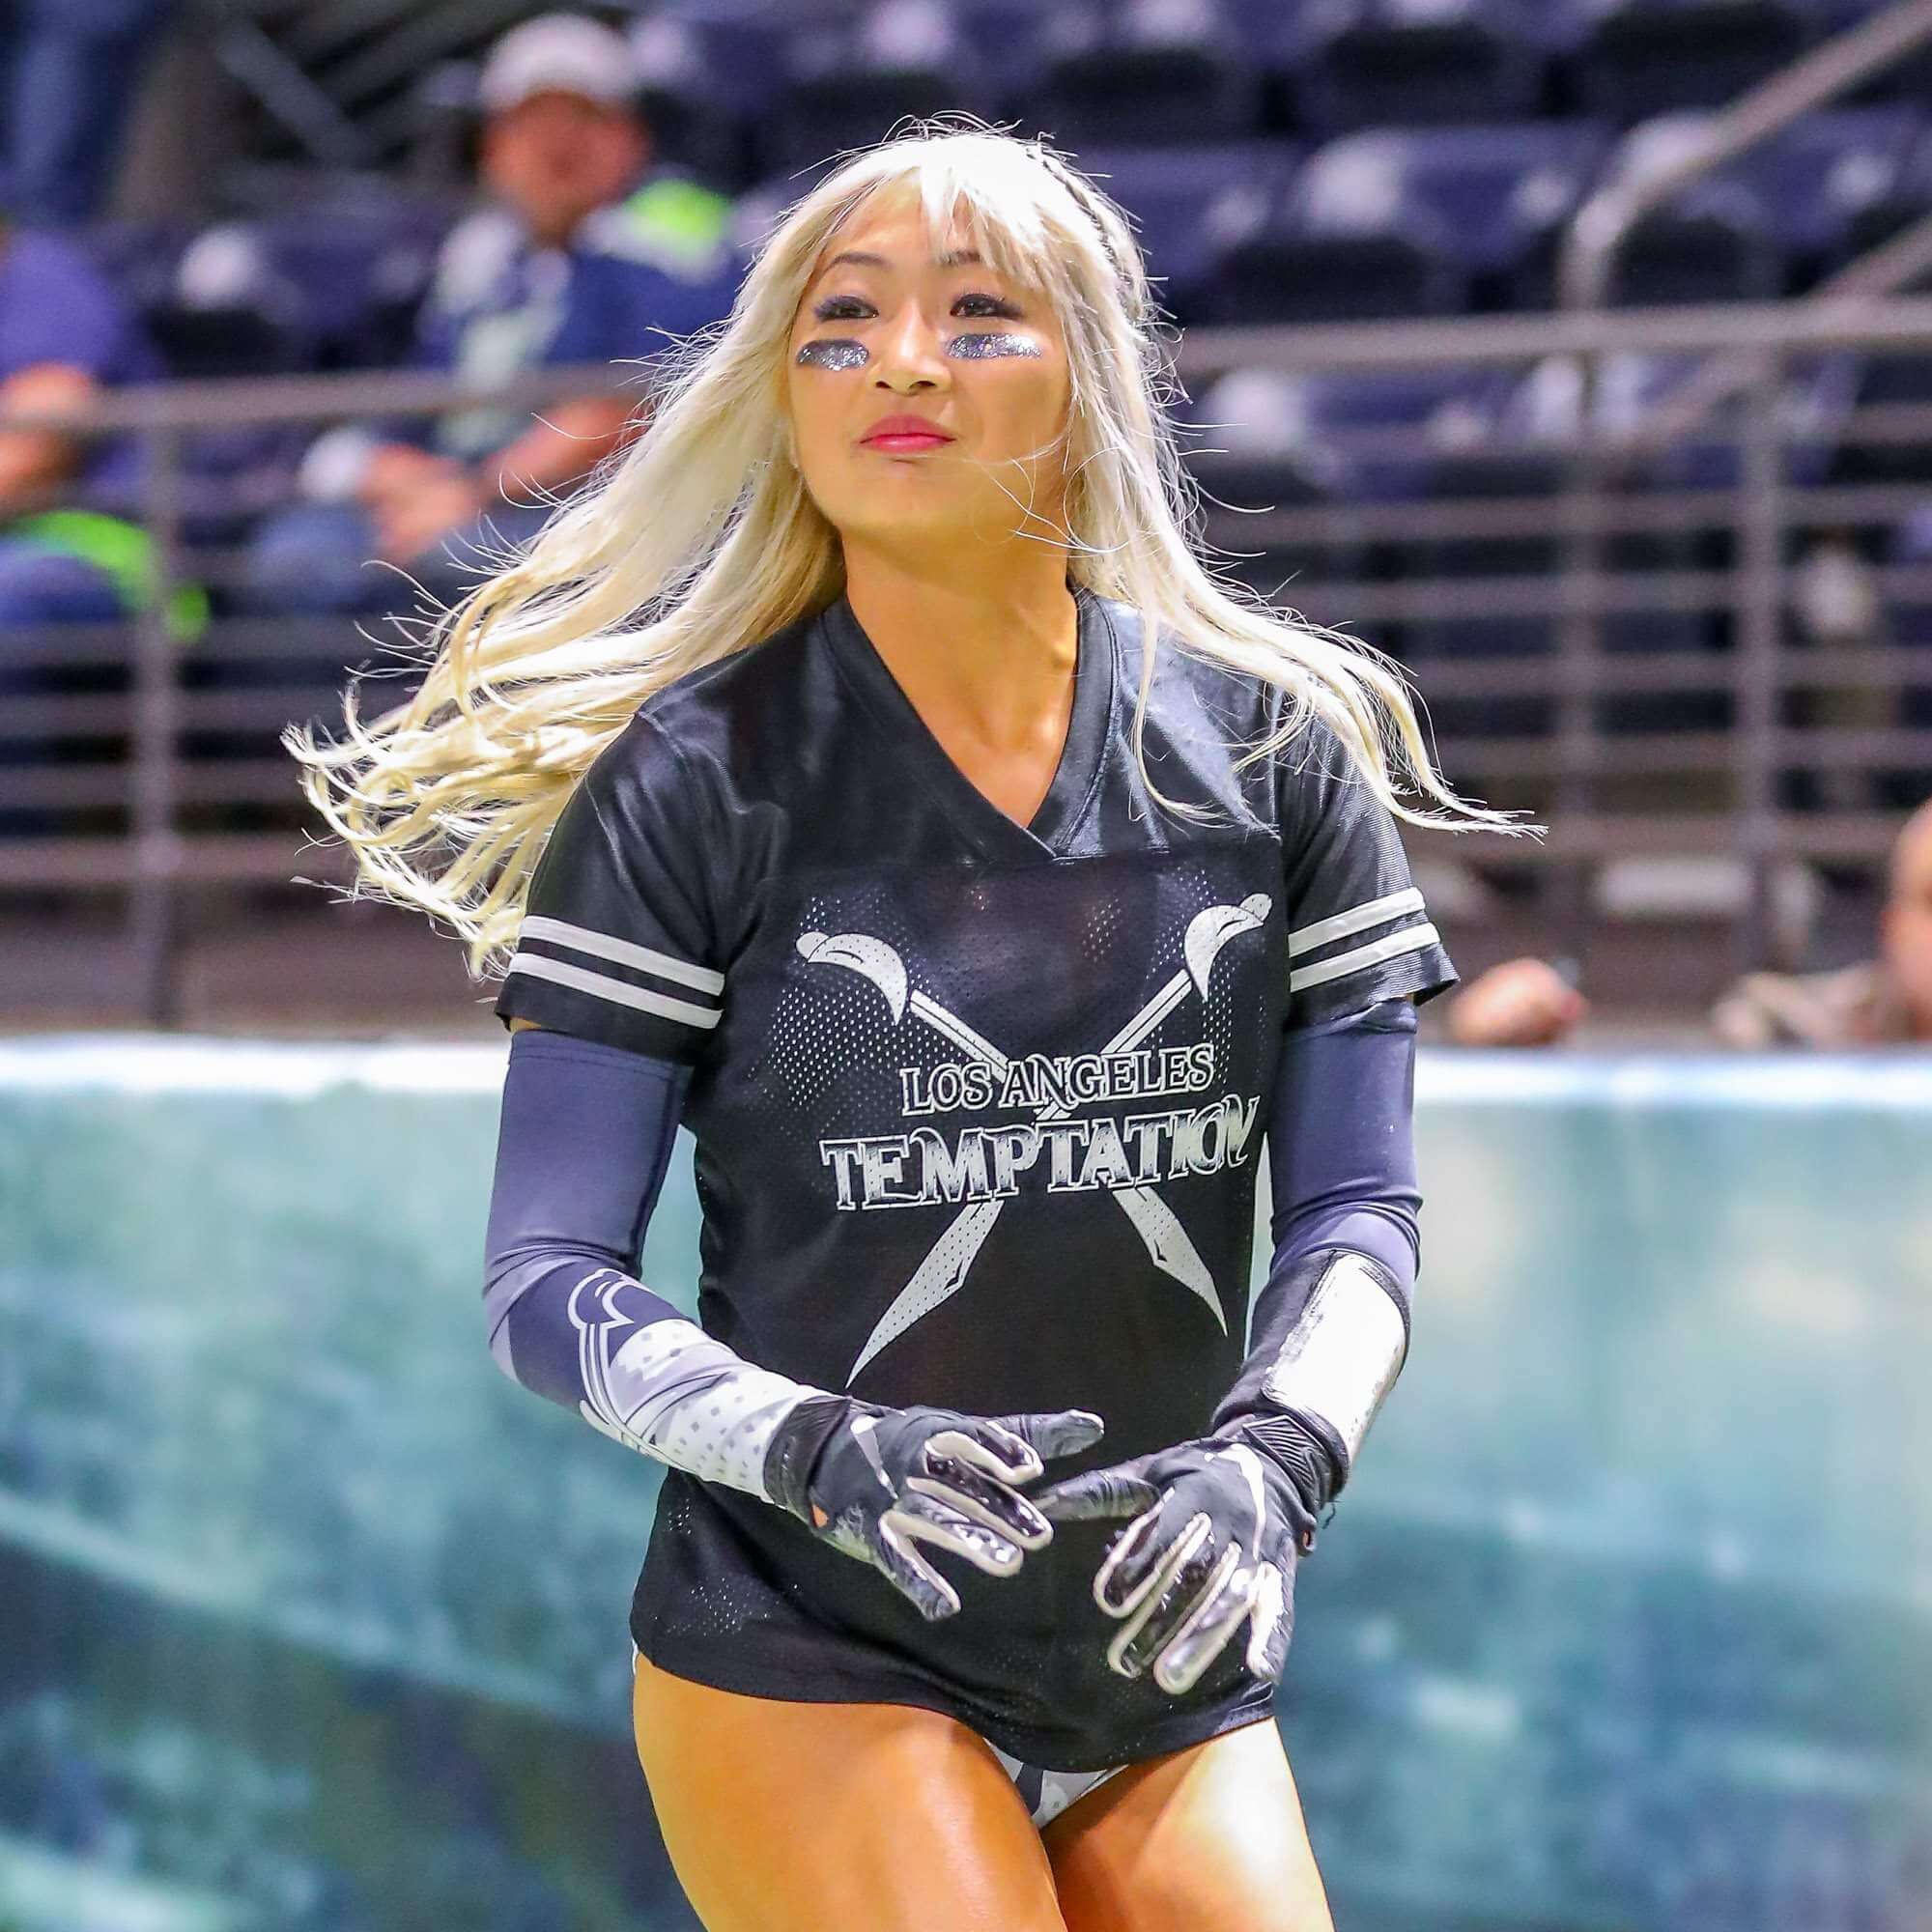 The Legends Football League Beautiful Women And Football, Need We Say Anymore! 55